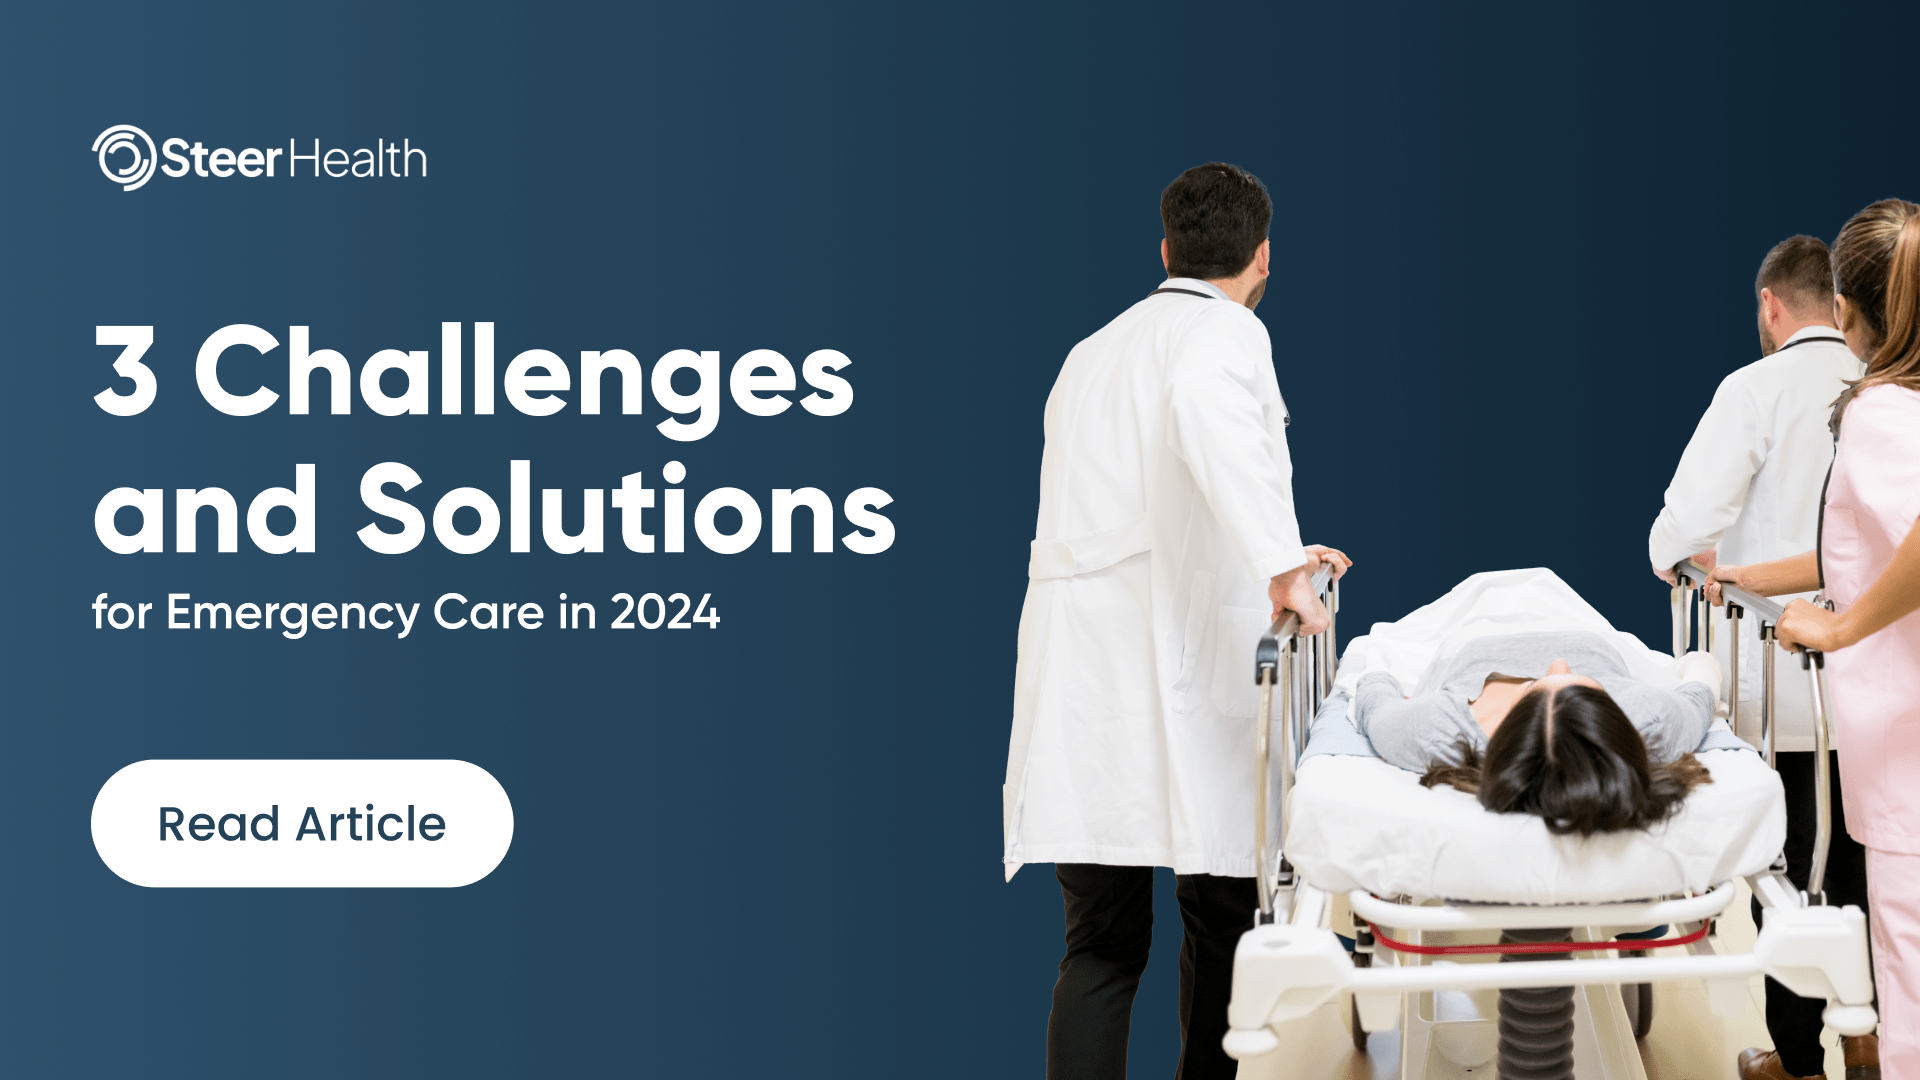 3 Challenges and Solutions for Emergency Care in 2024